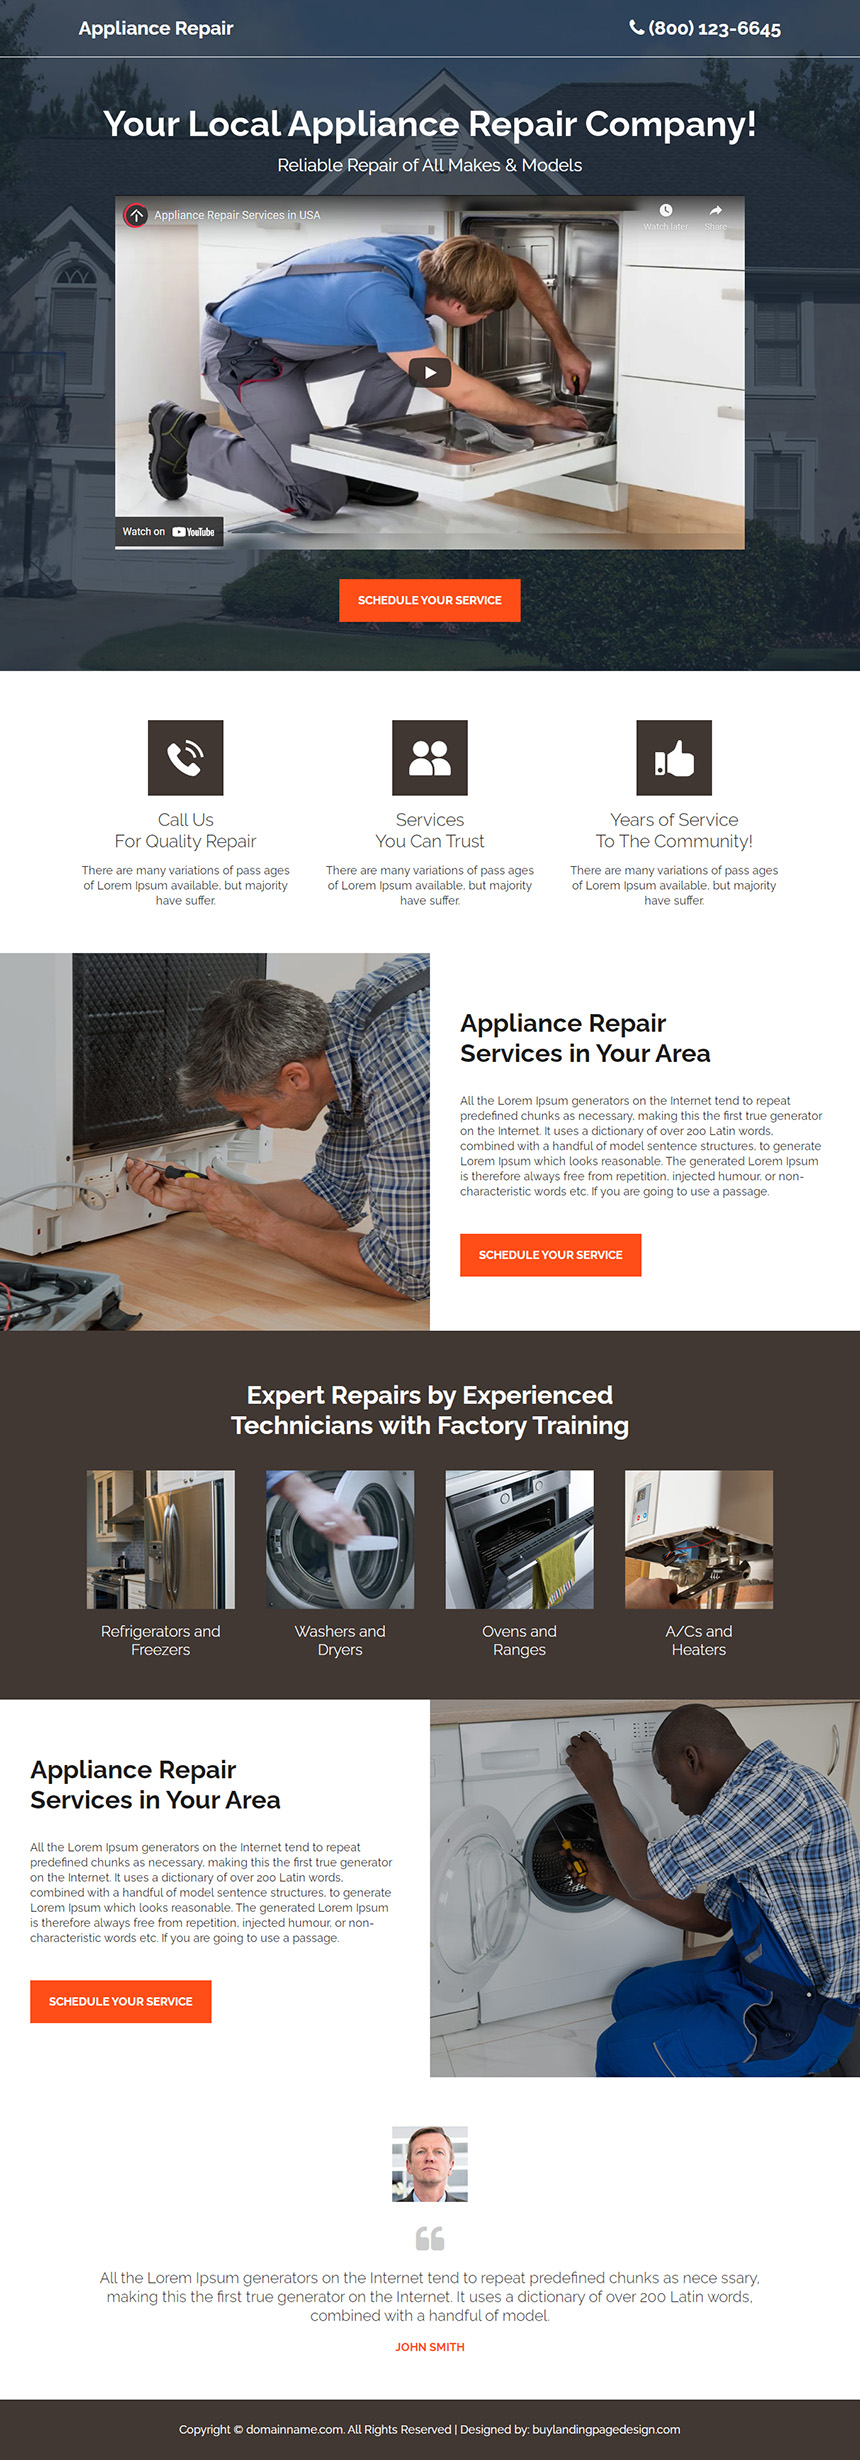 appliance repair company lead capture video landing page